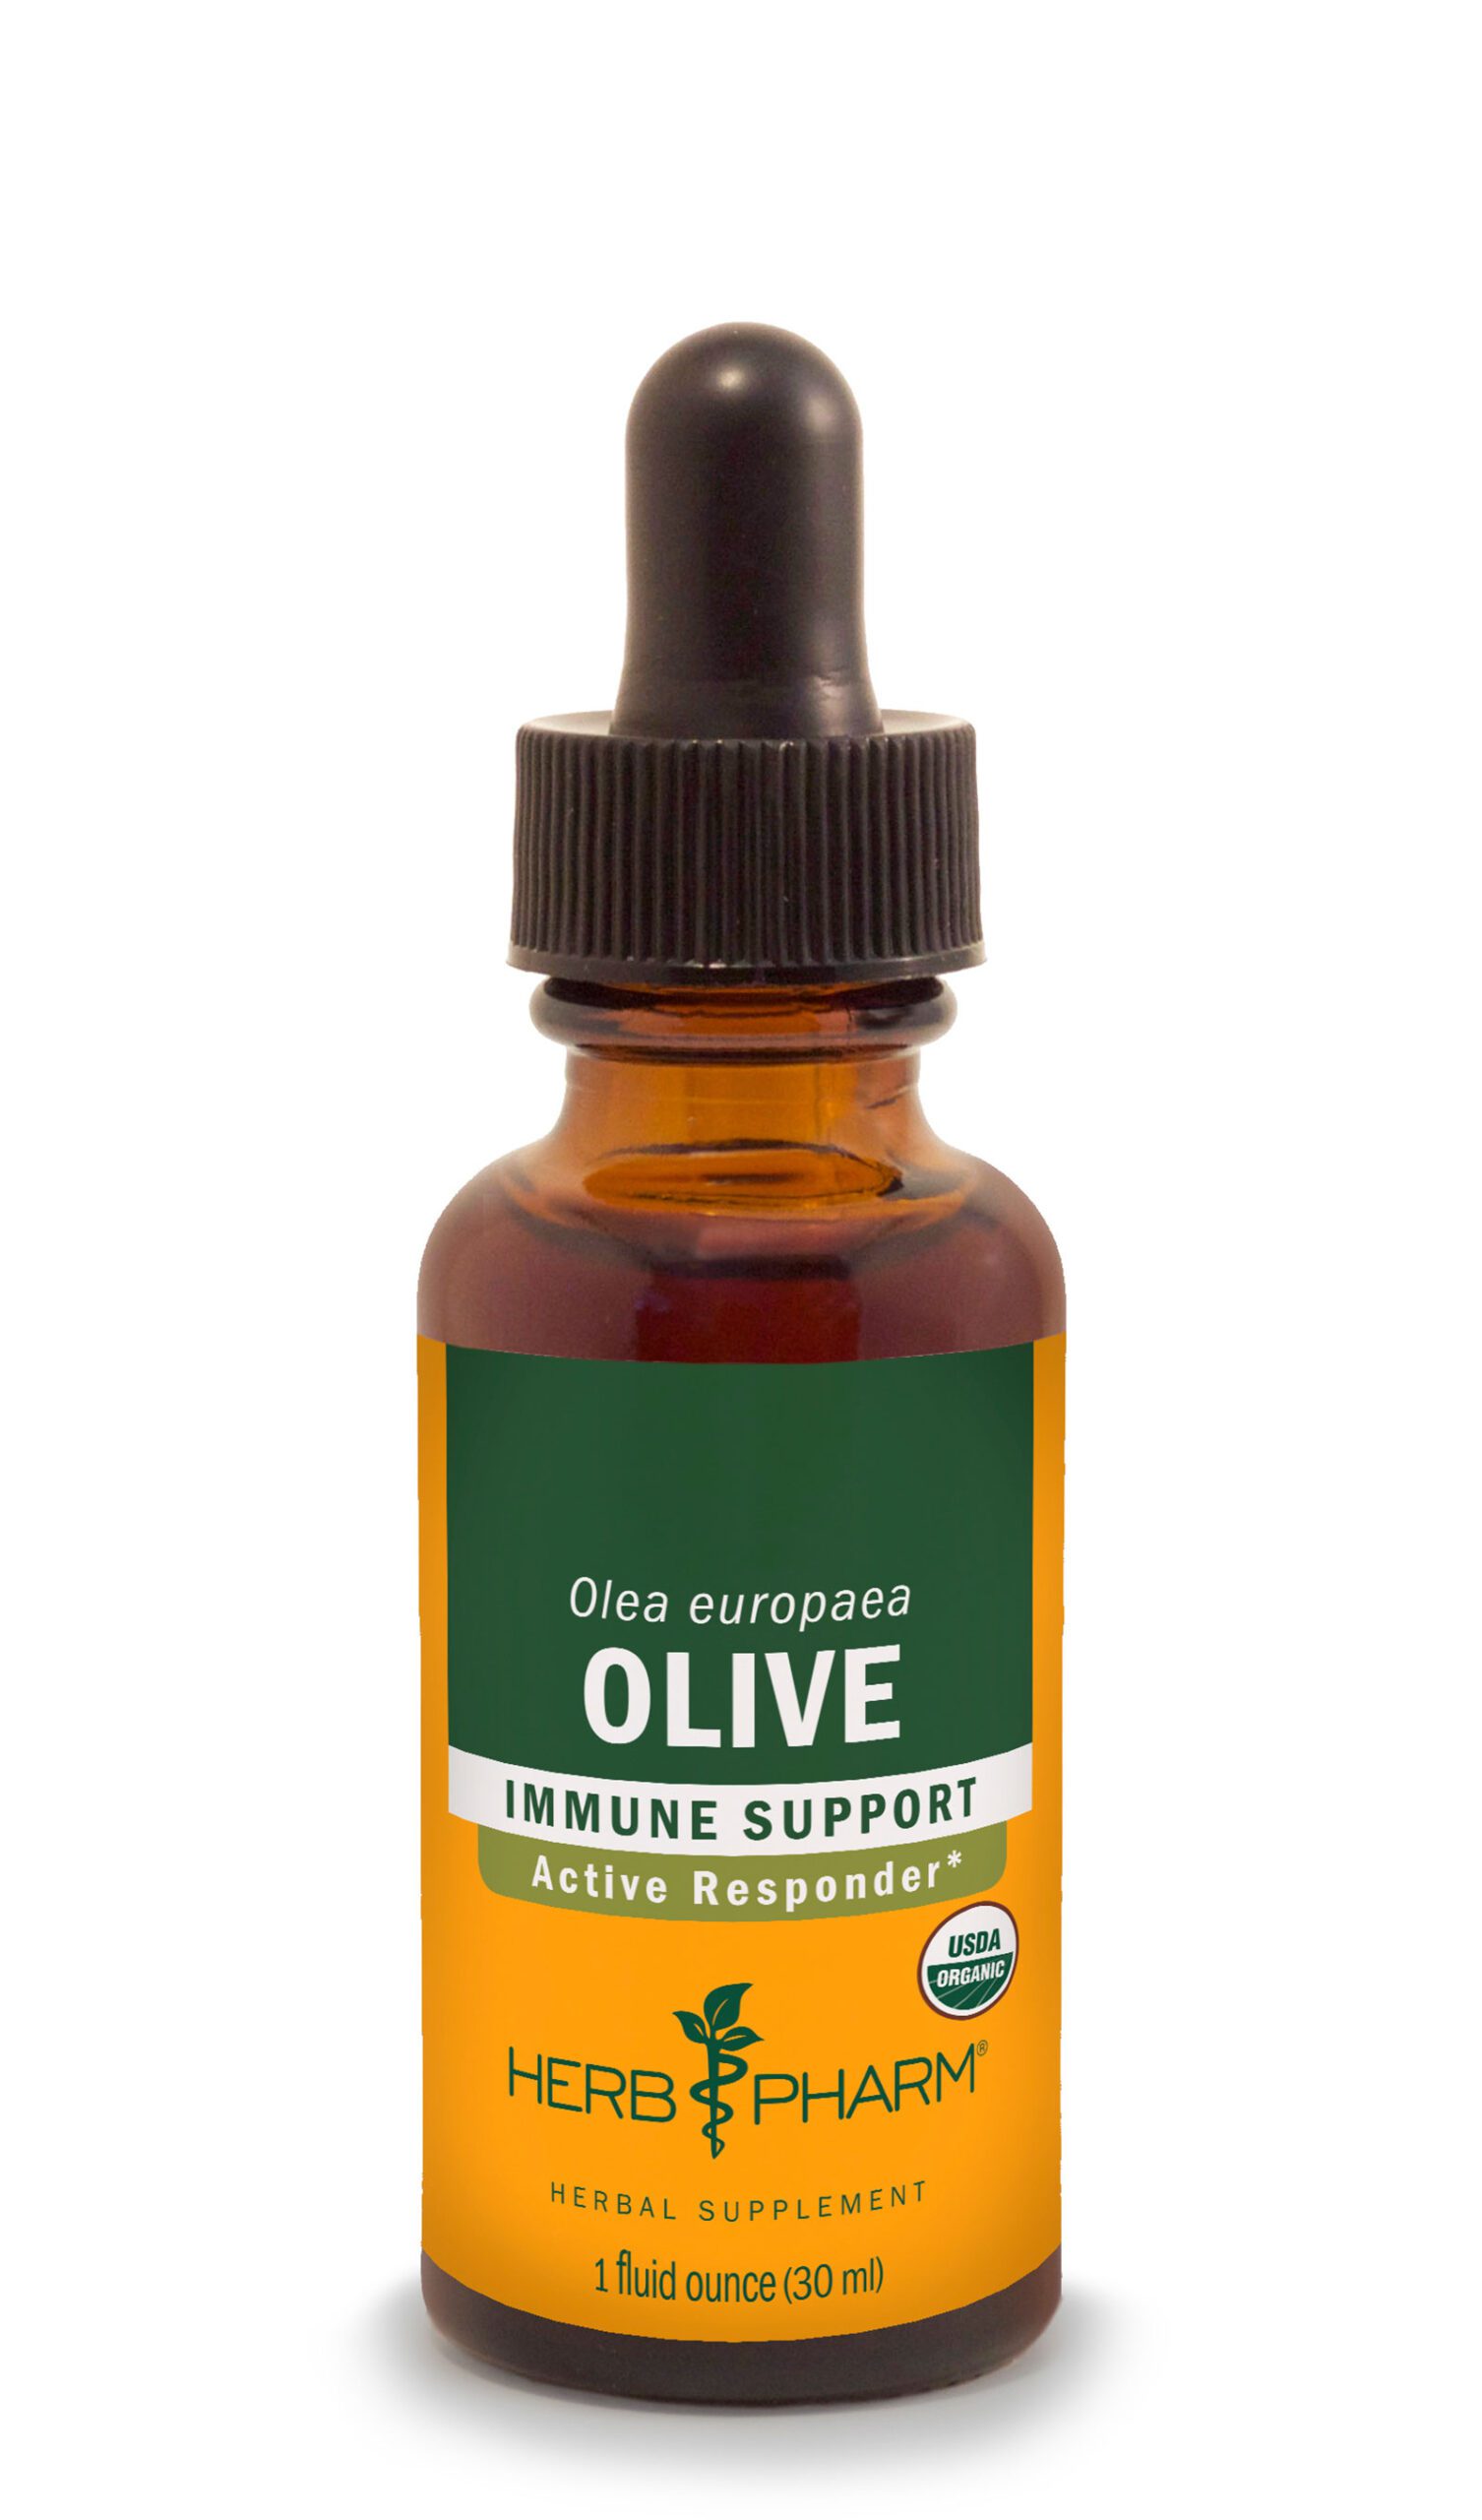 Product Listing Image for Herb Pharm Olive Tincture 1oz